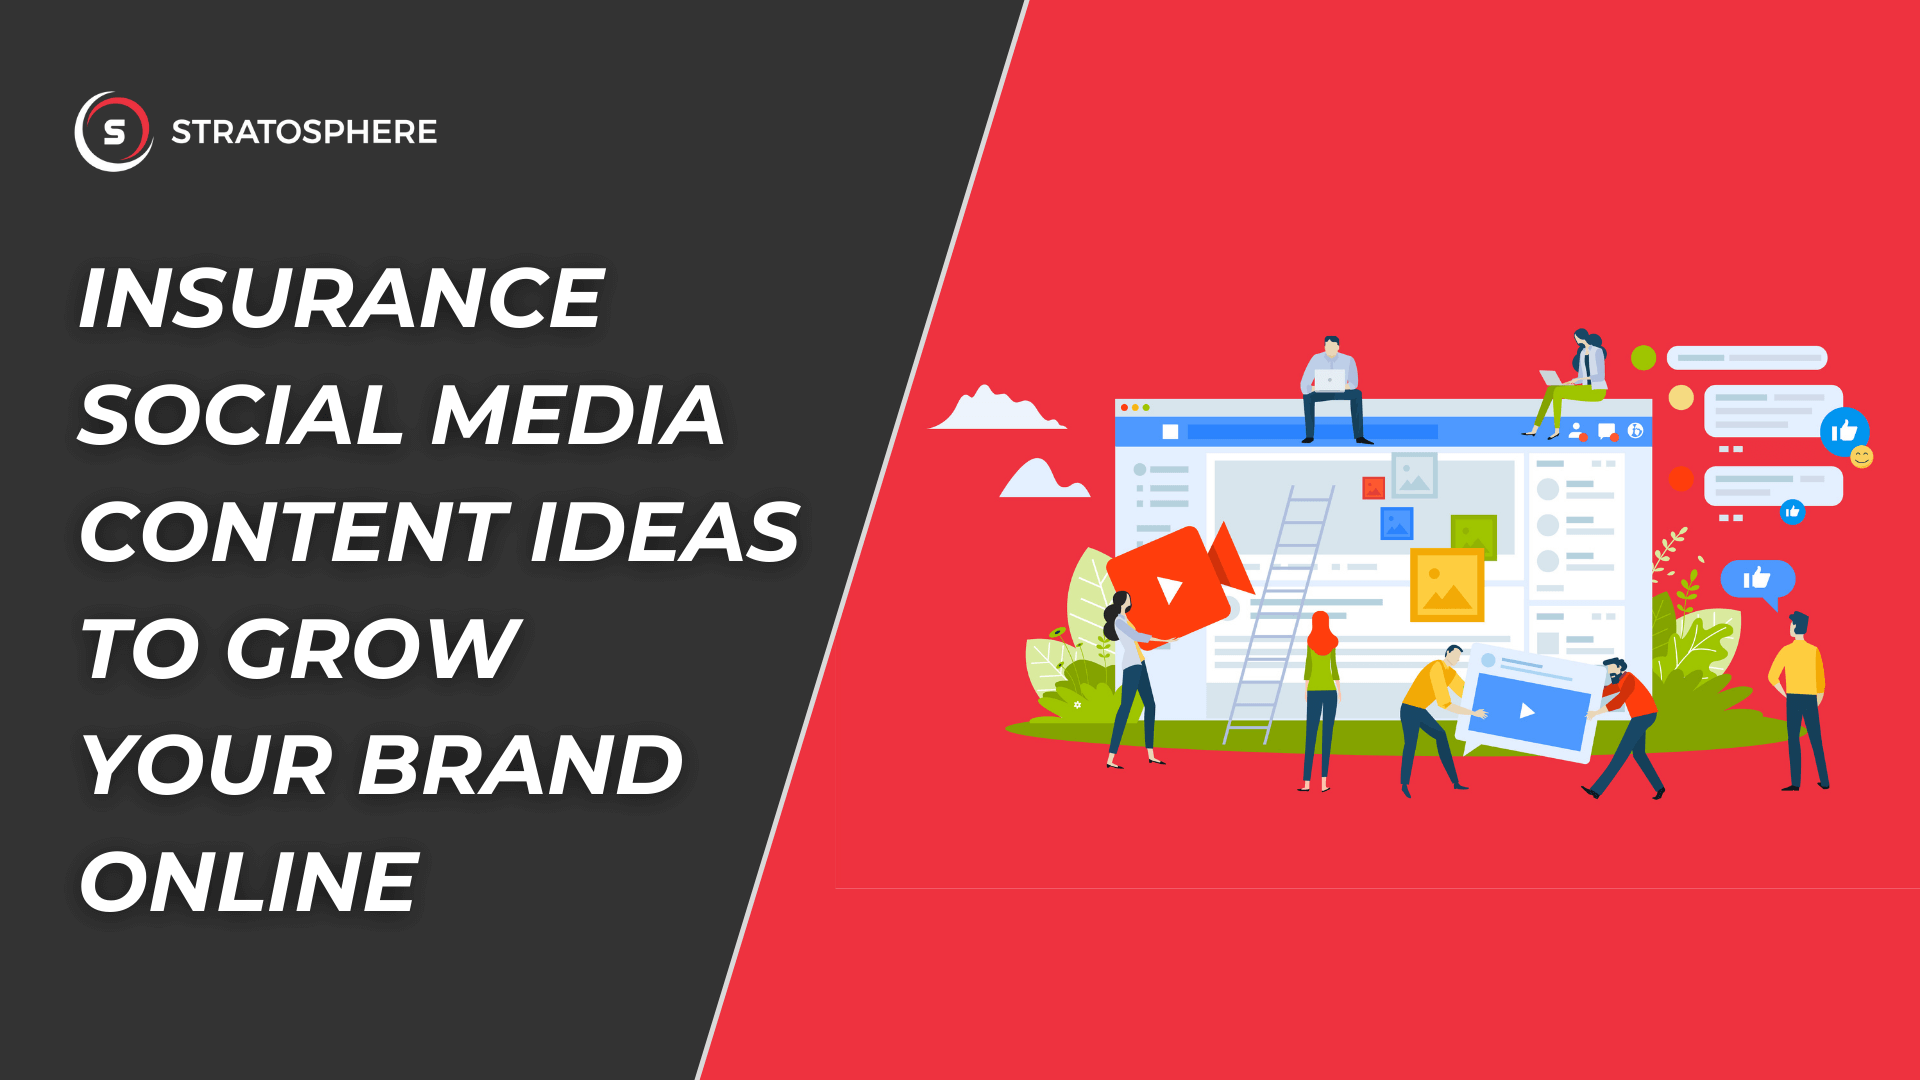 11 Insurance Social Media Content Ideas to Grow Your Brand Online